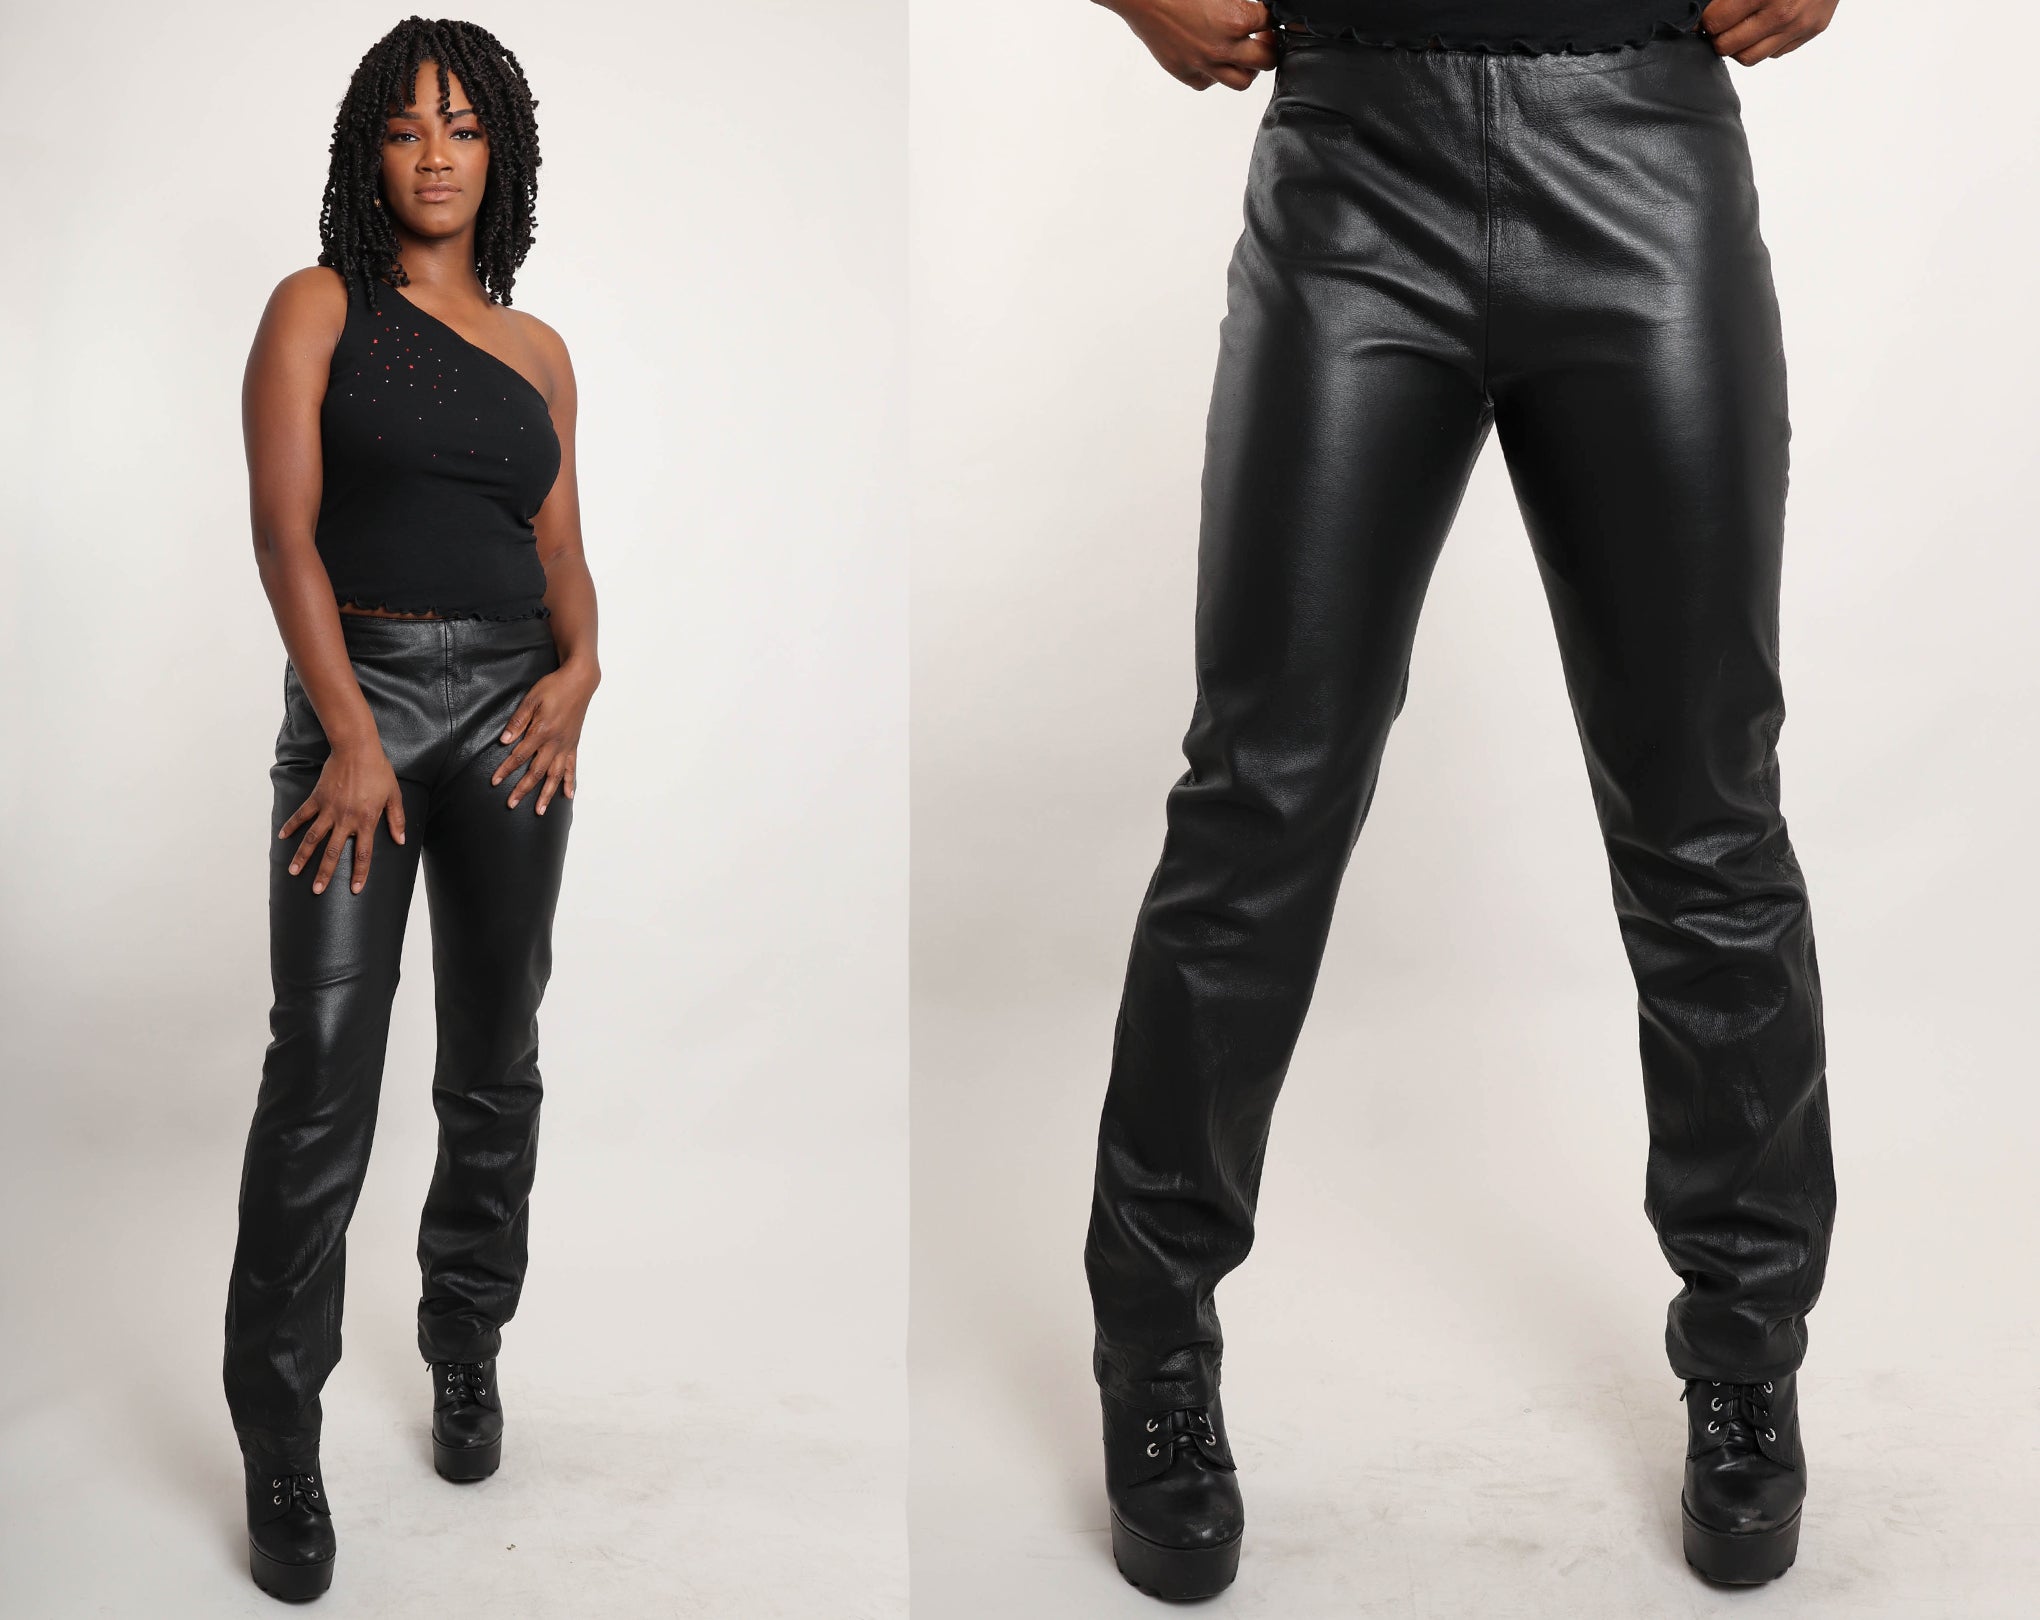 cloud ace recommends babes in leather pants pic